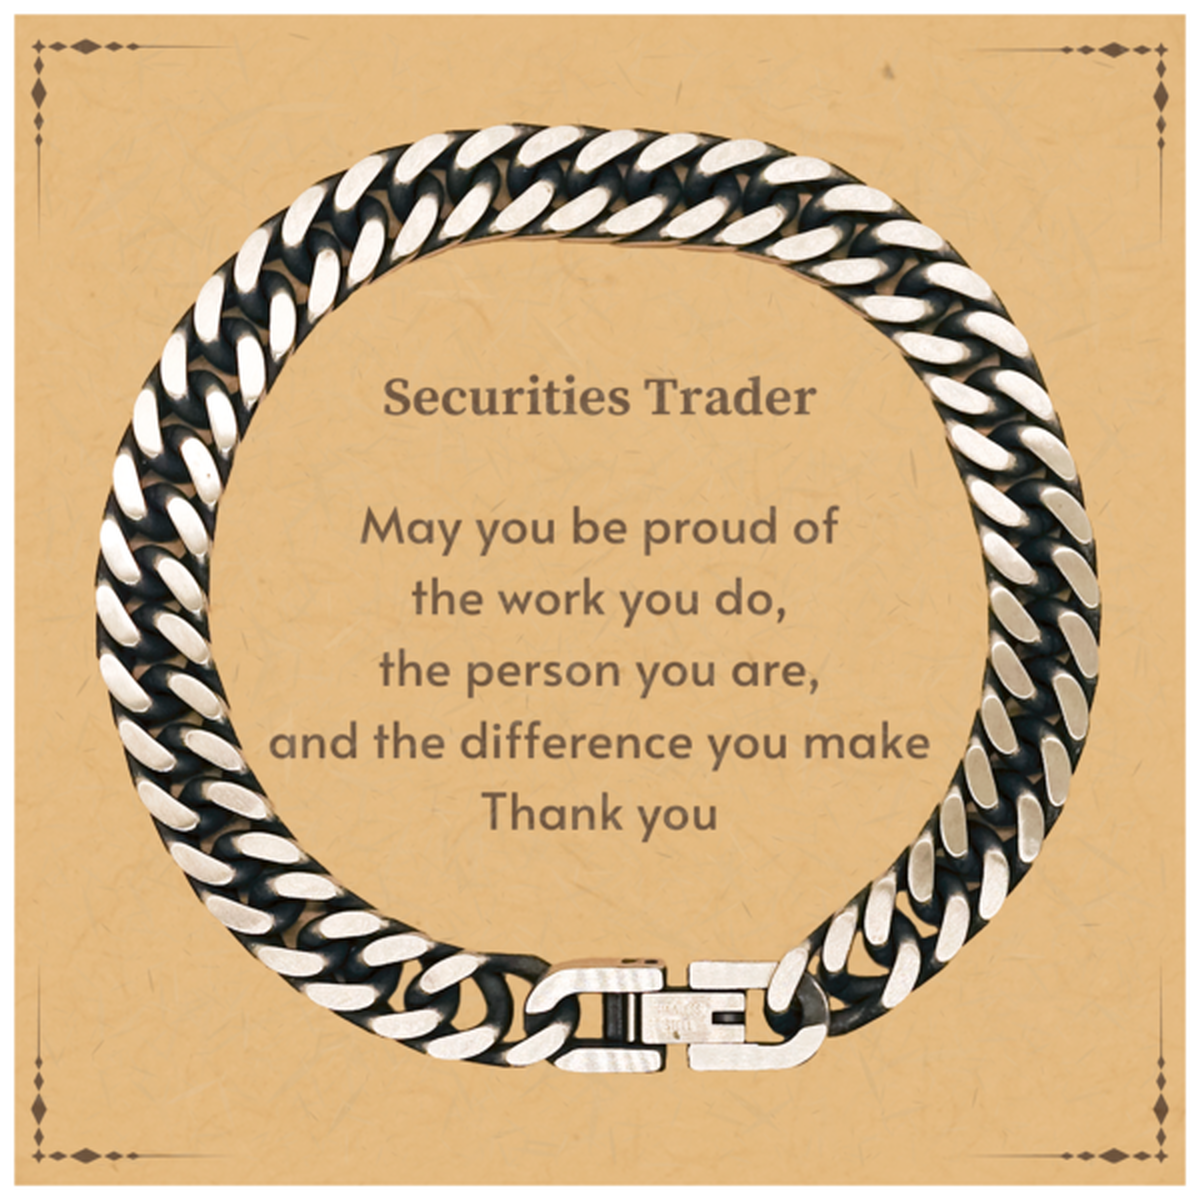 Heartwarming Cuban Link Chain Bracelet Retirement Coworkers Gifts for Securities Trader, Securities Trader May You be proud of the work you do, the person you are Gifts for Boss Men Women Friends